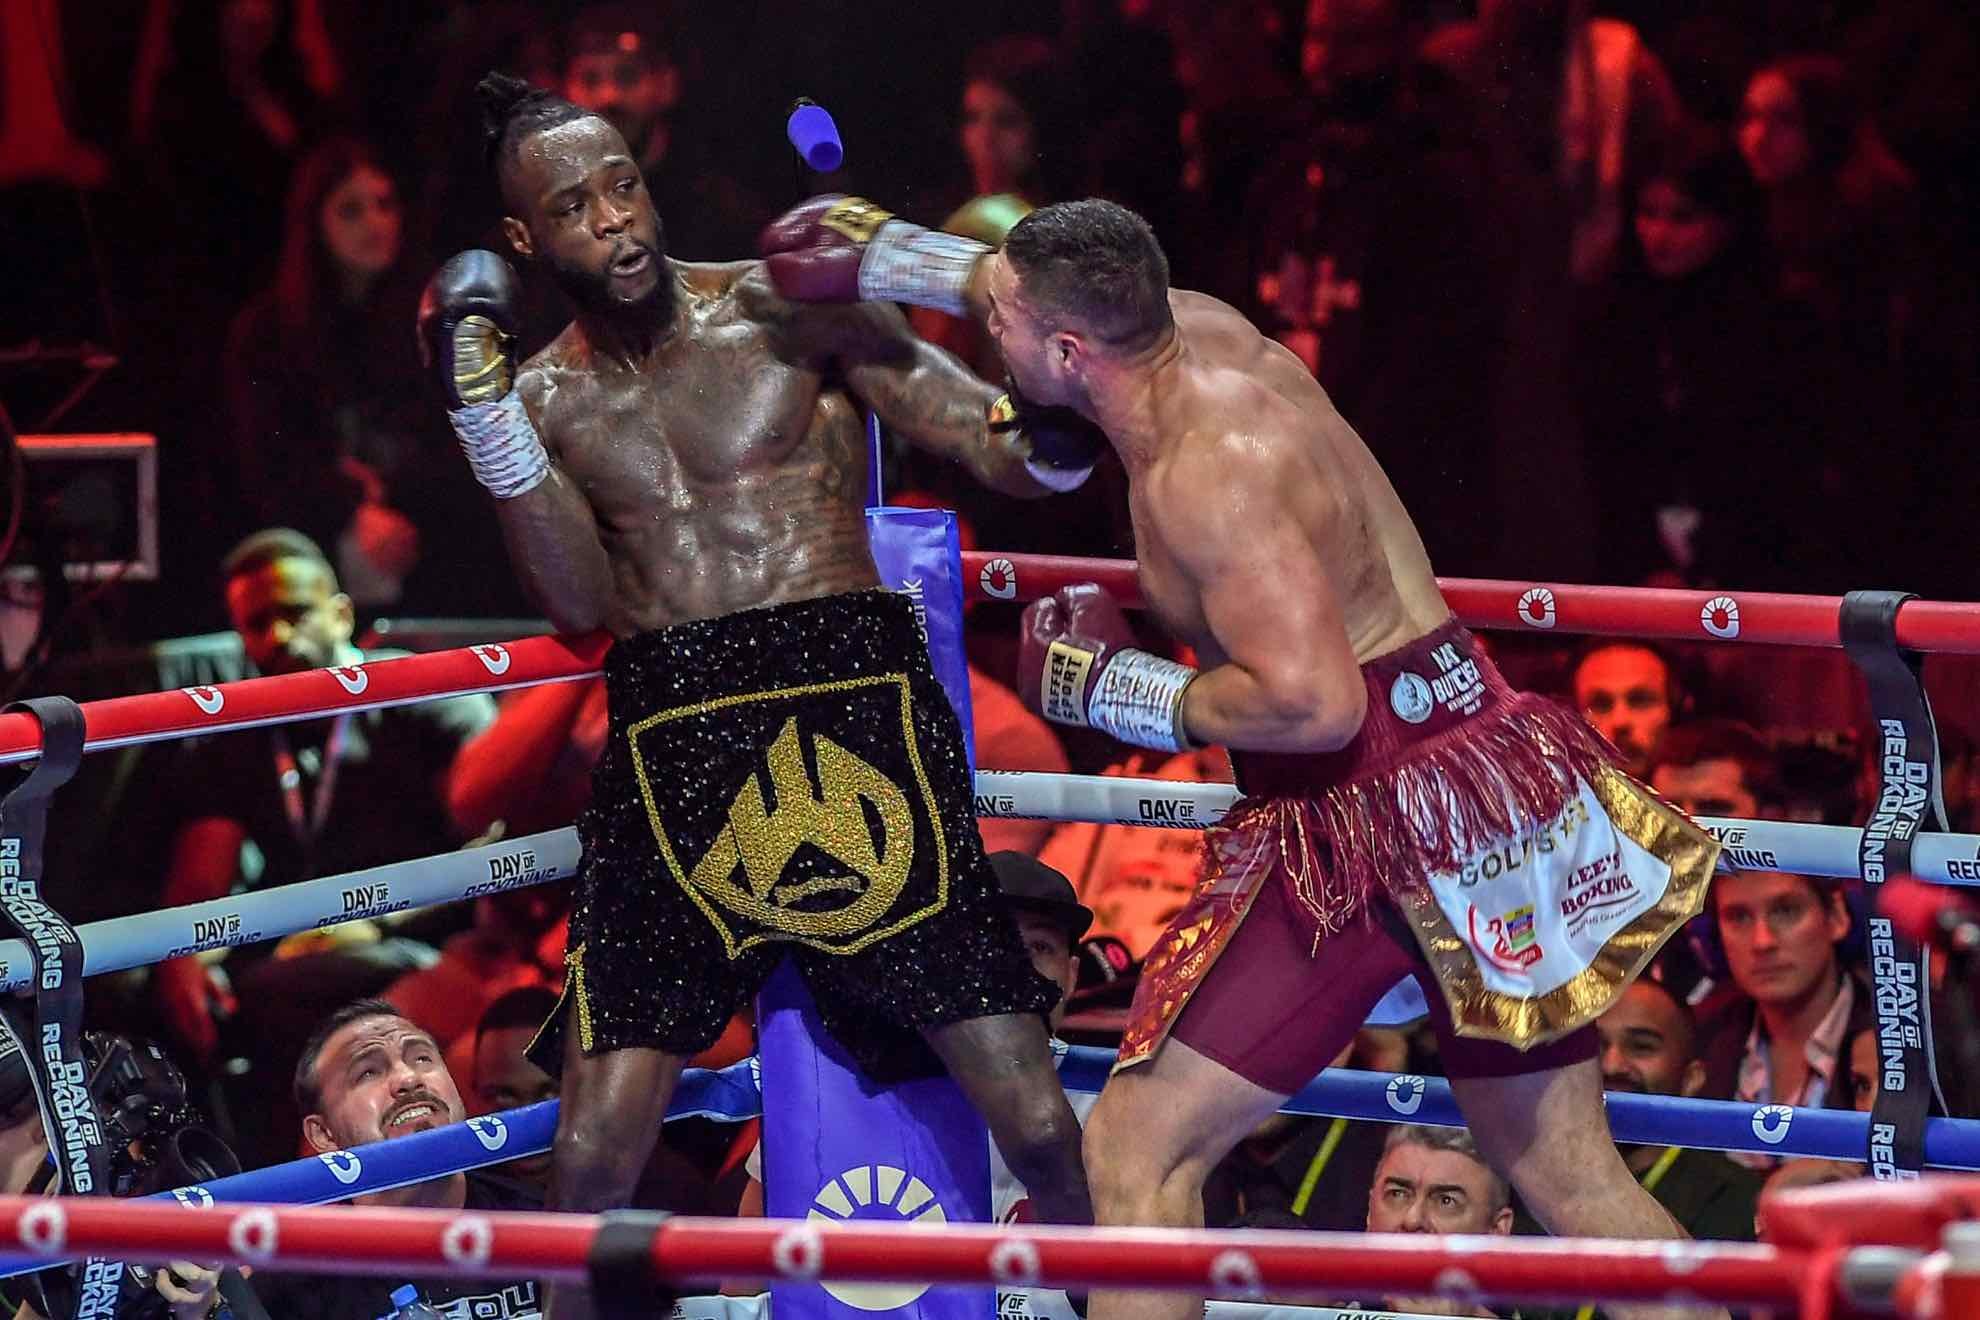 Deontay Wilder suffered a surprising defeat to Joseph Parker